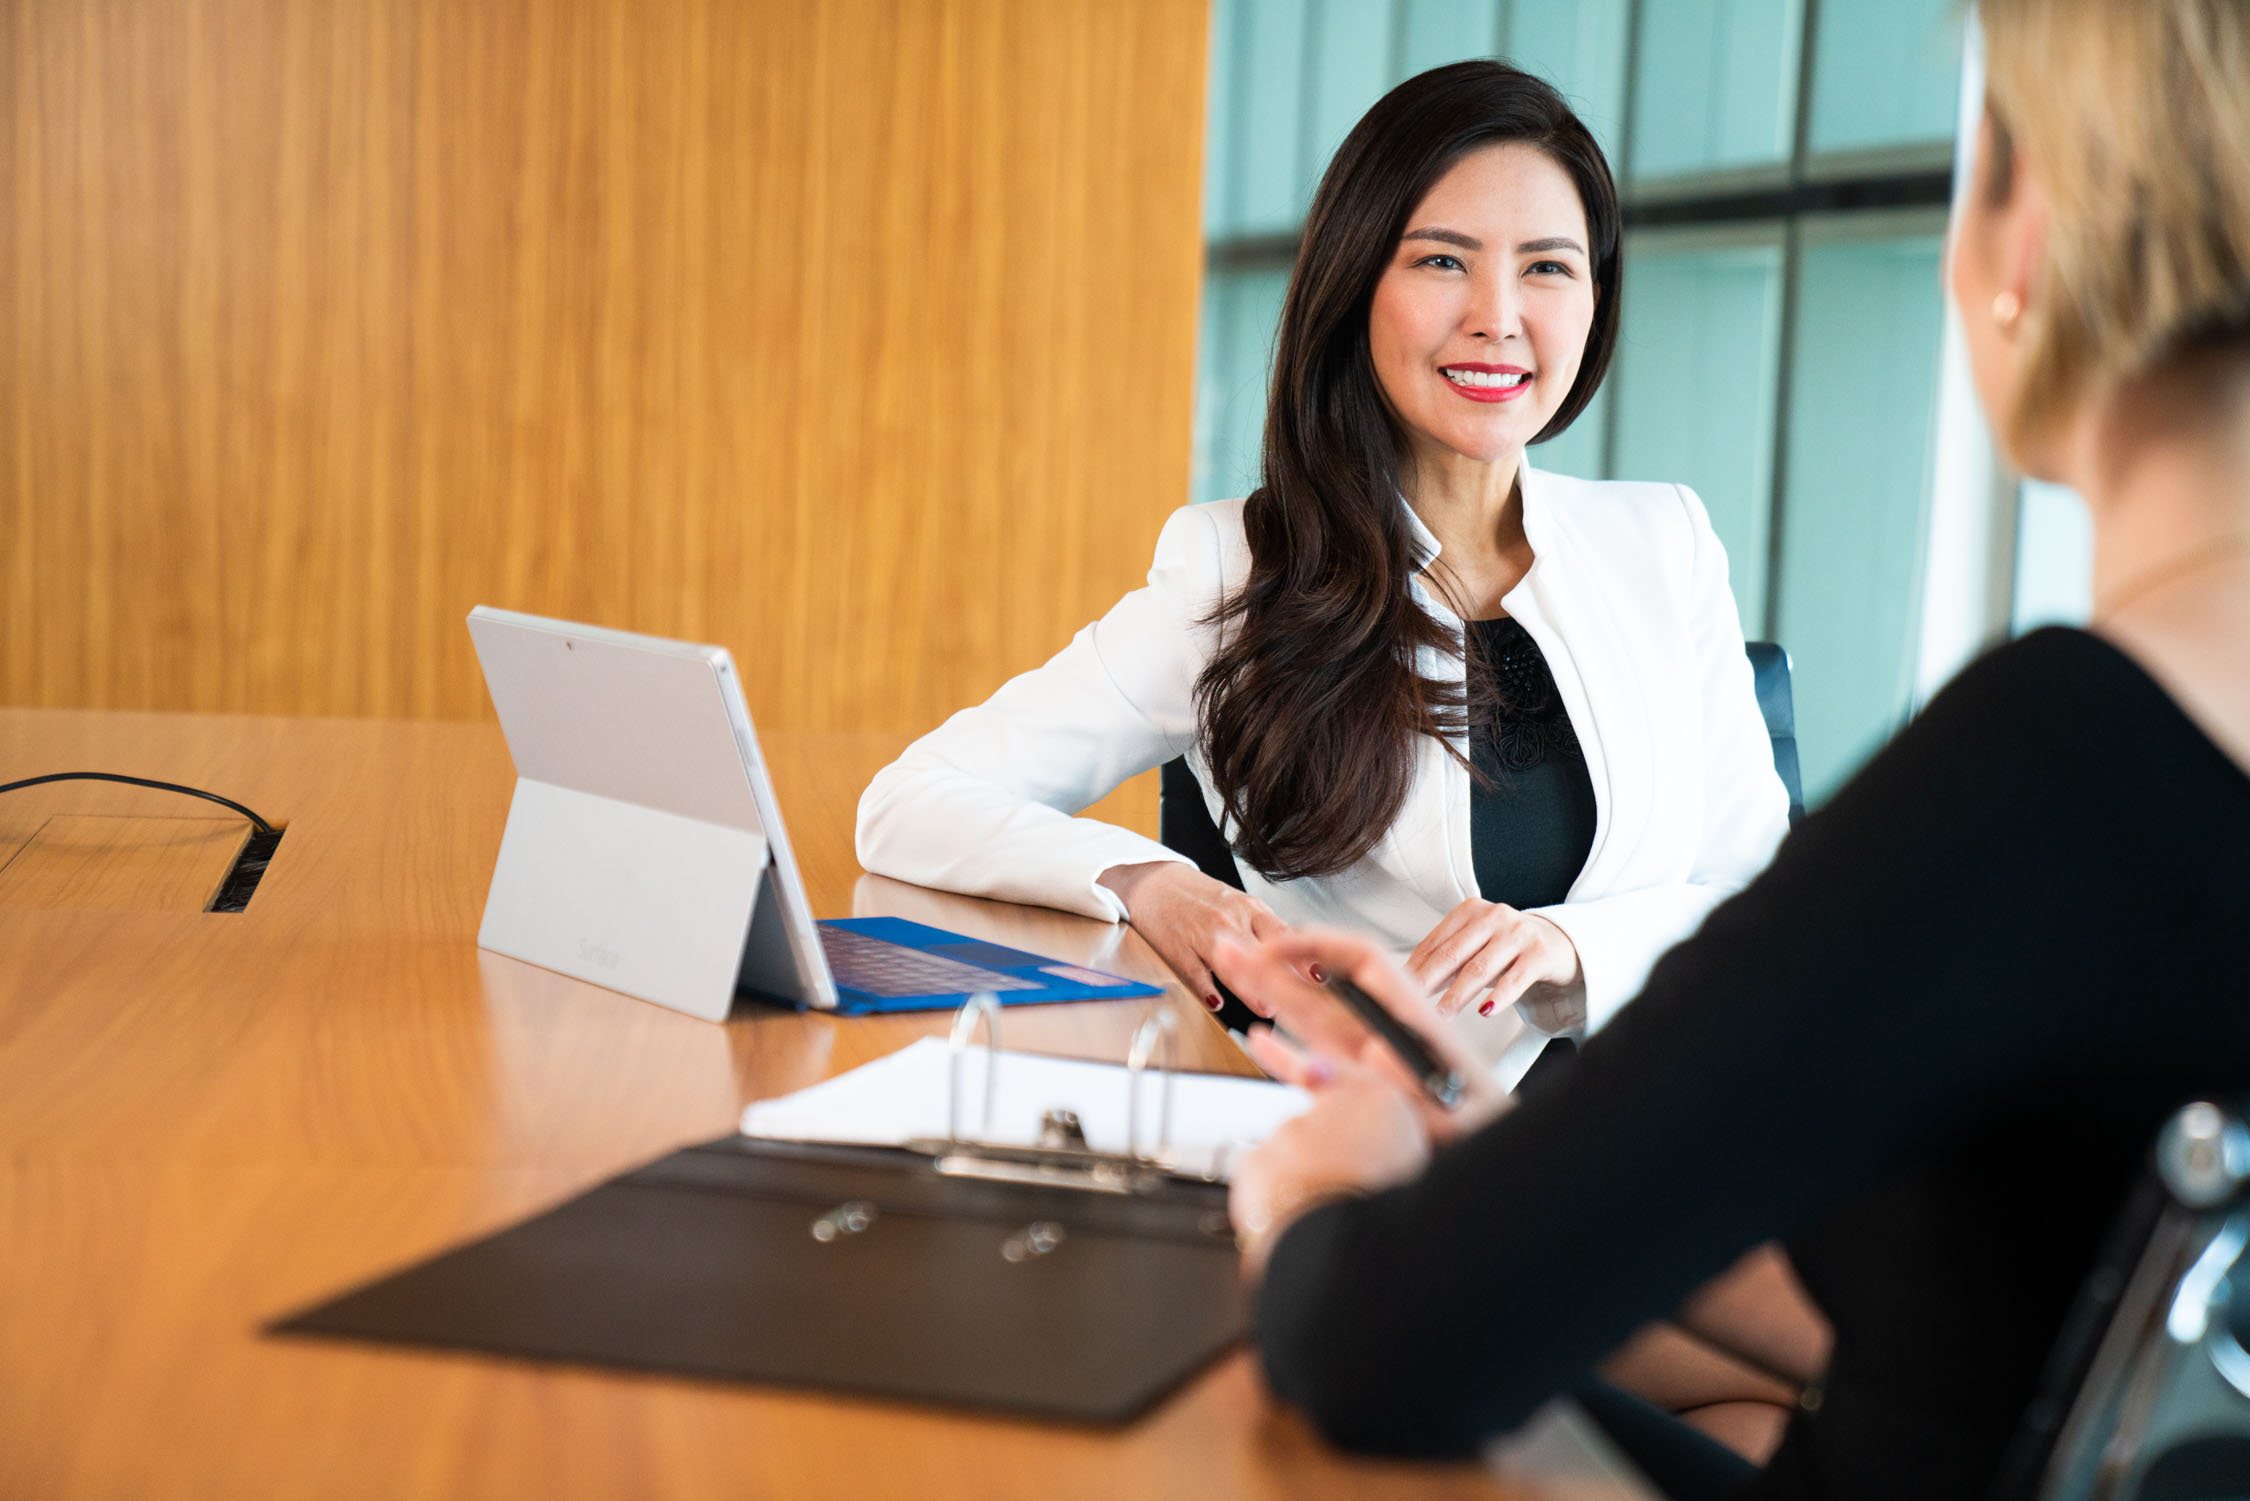 Asian woman in a white blazer smiling at her colleague in an office setting